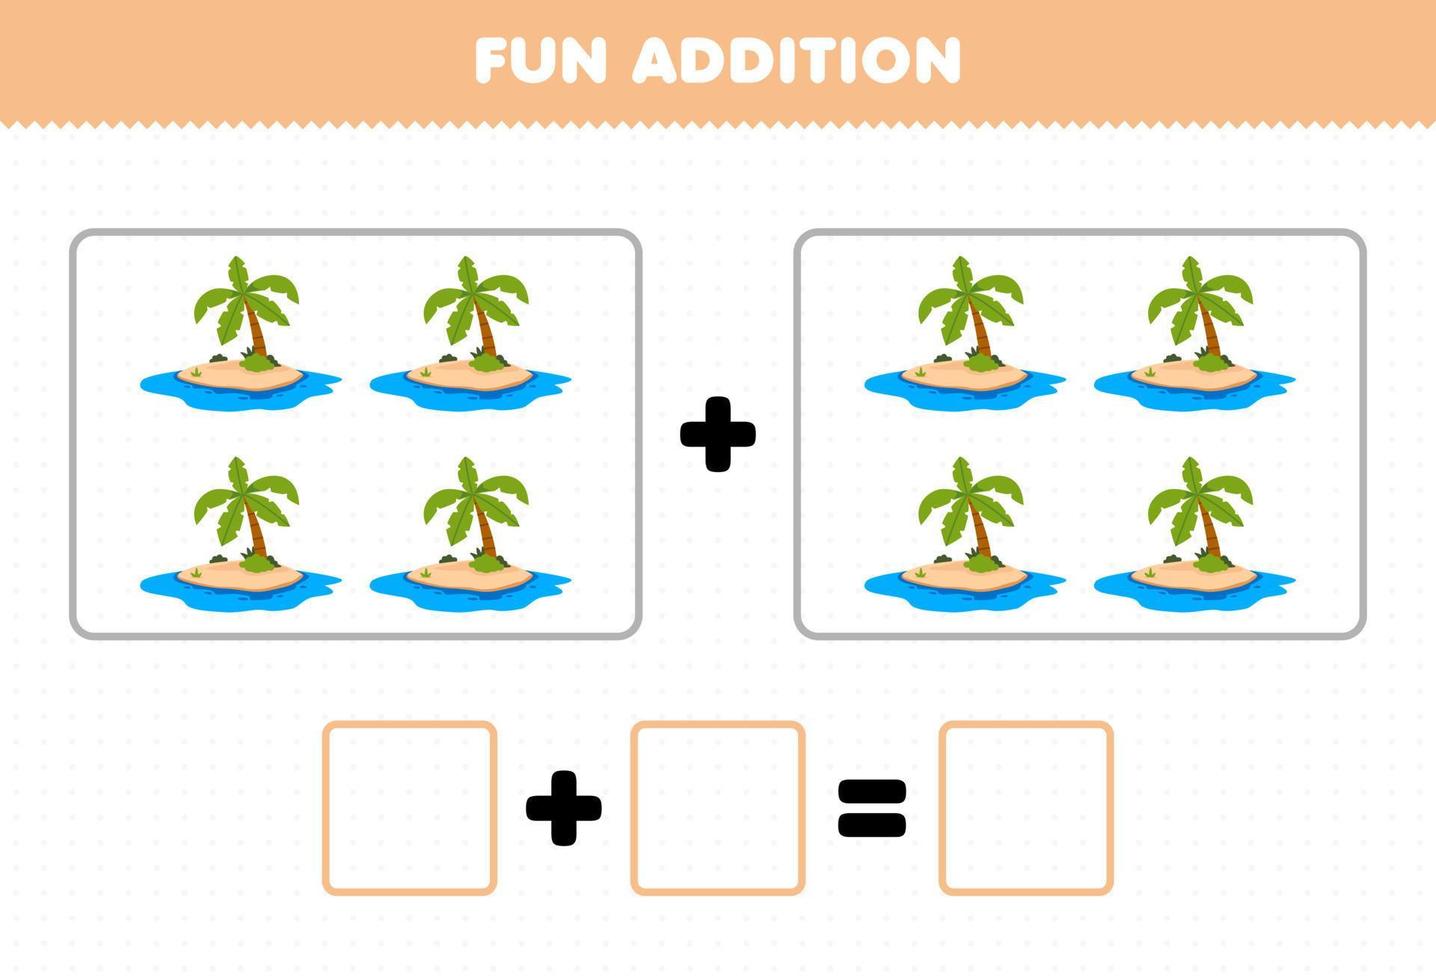 Education game for children fun addition by counting cute cartoon island pictures printable nature worksheet vector